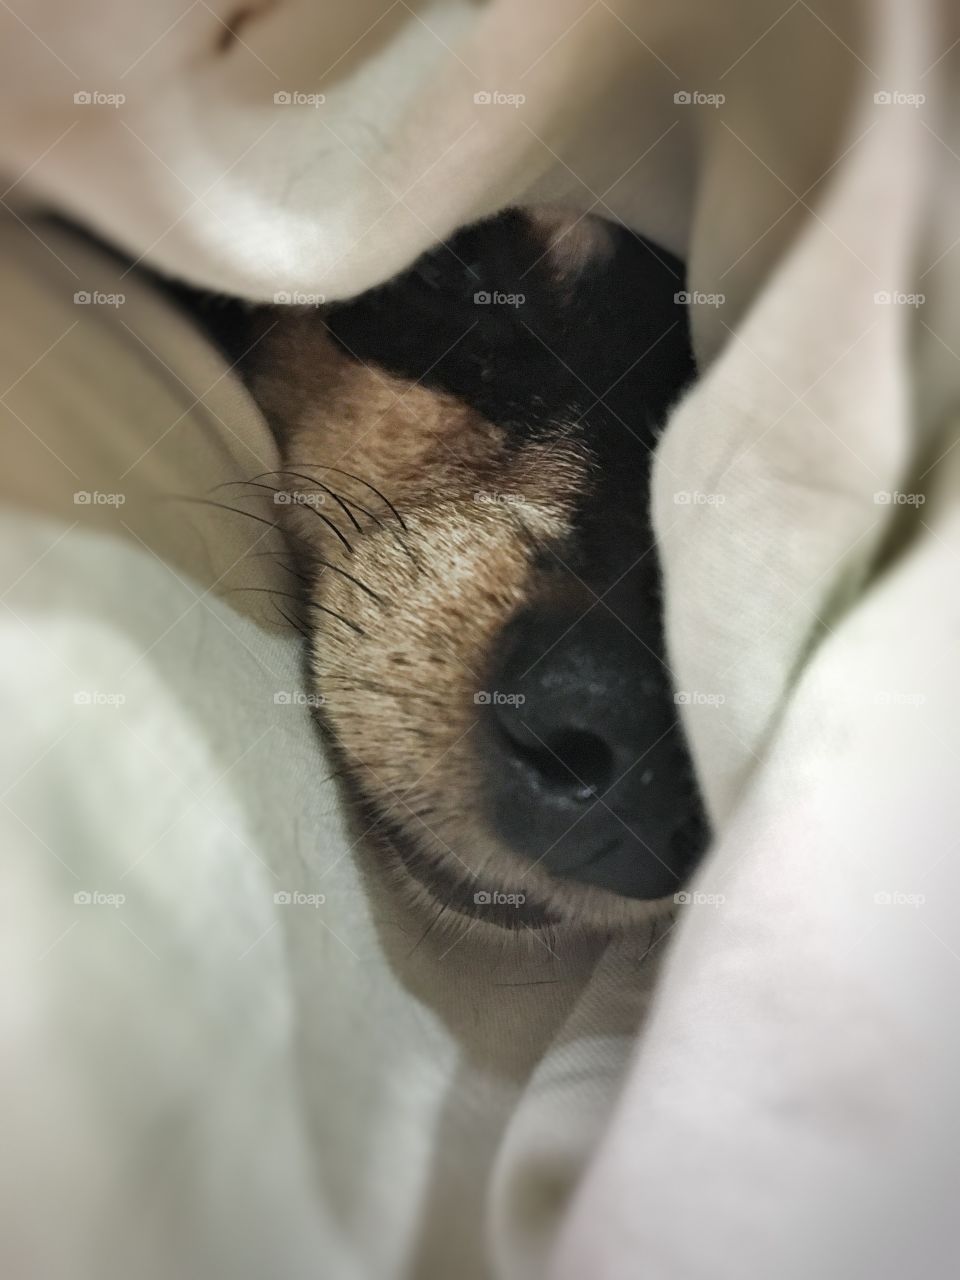 My sweet dog all snuggled up and cozy.